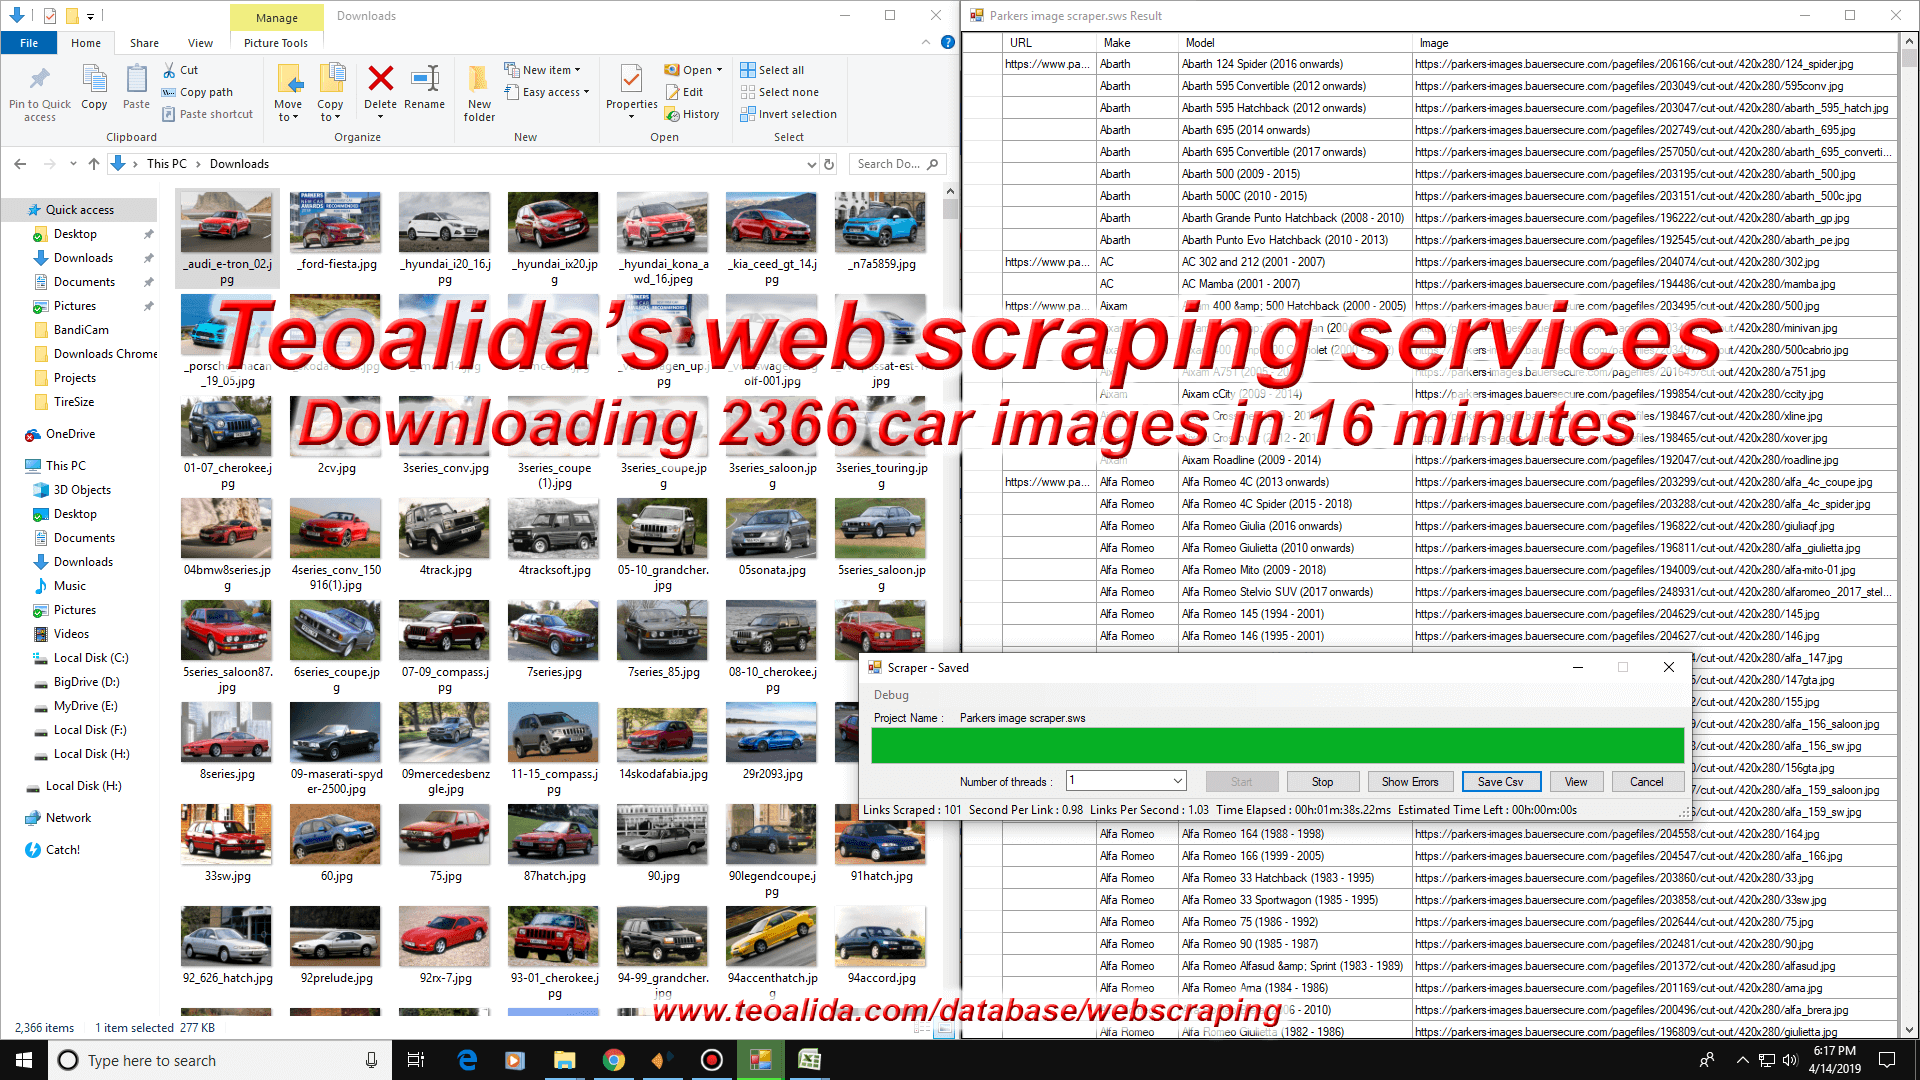 Web scraping services